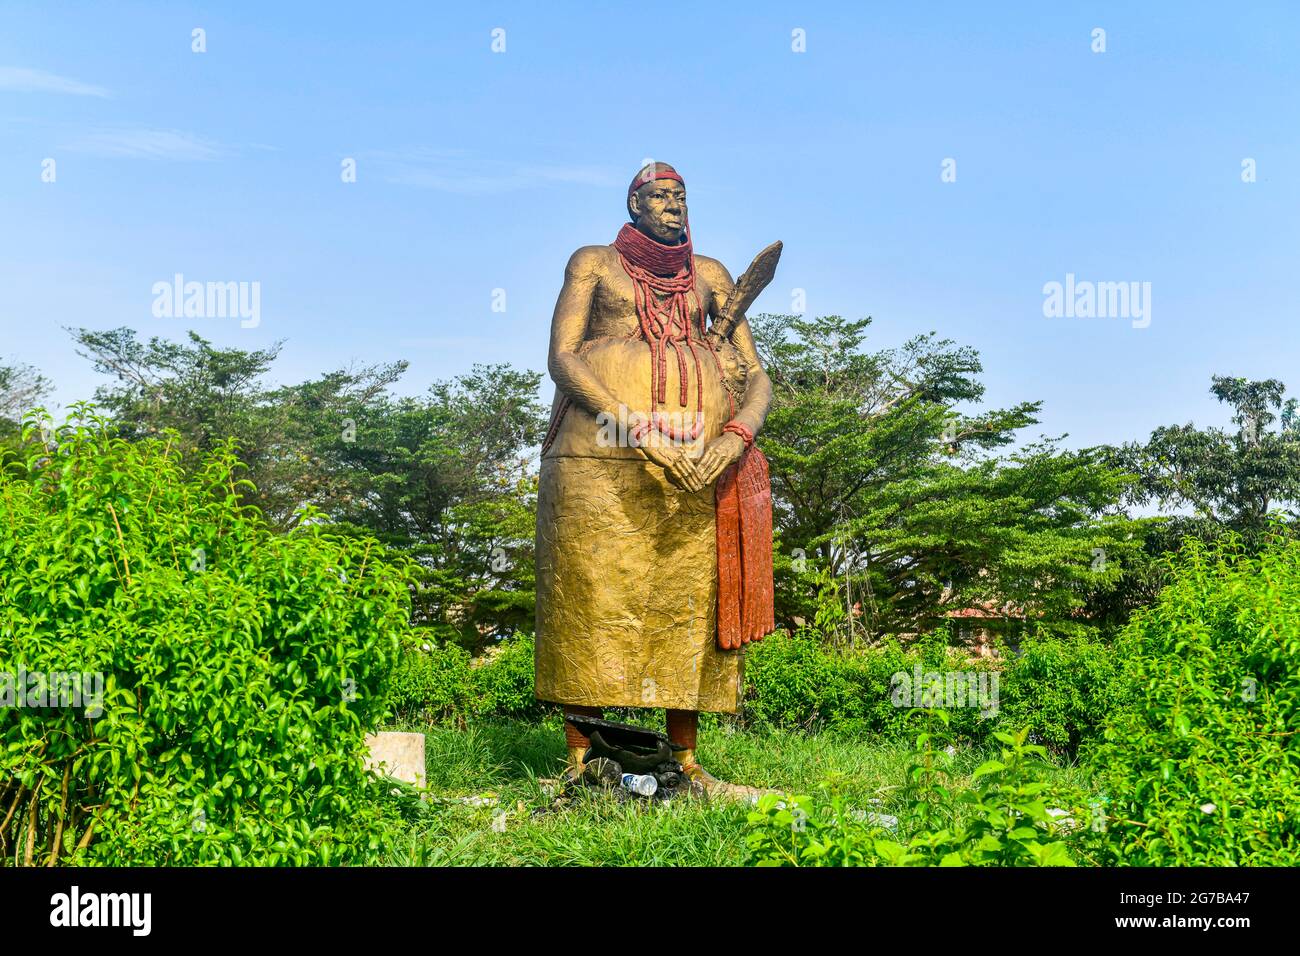 KingÂ´s statue outside the Benin National Museum in the Royal gardens, Benin city, Nigeria Stock Photo